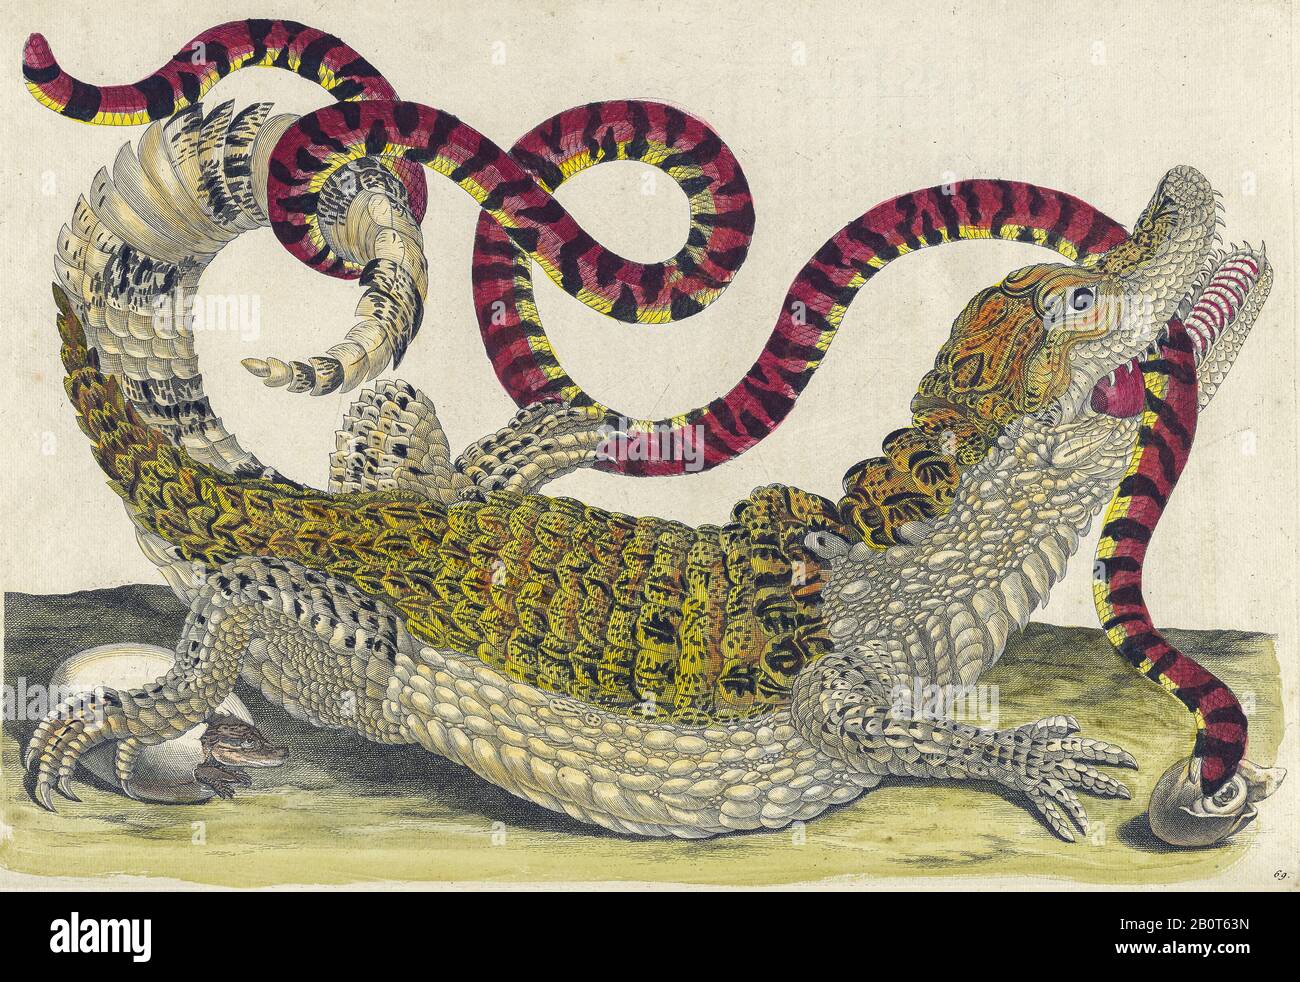 Common caiman and South American false coral snake, from Metamorphosis insectorum Surinamensium (Surinam insects) a hand coloured 18th century Book by Stock Photo